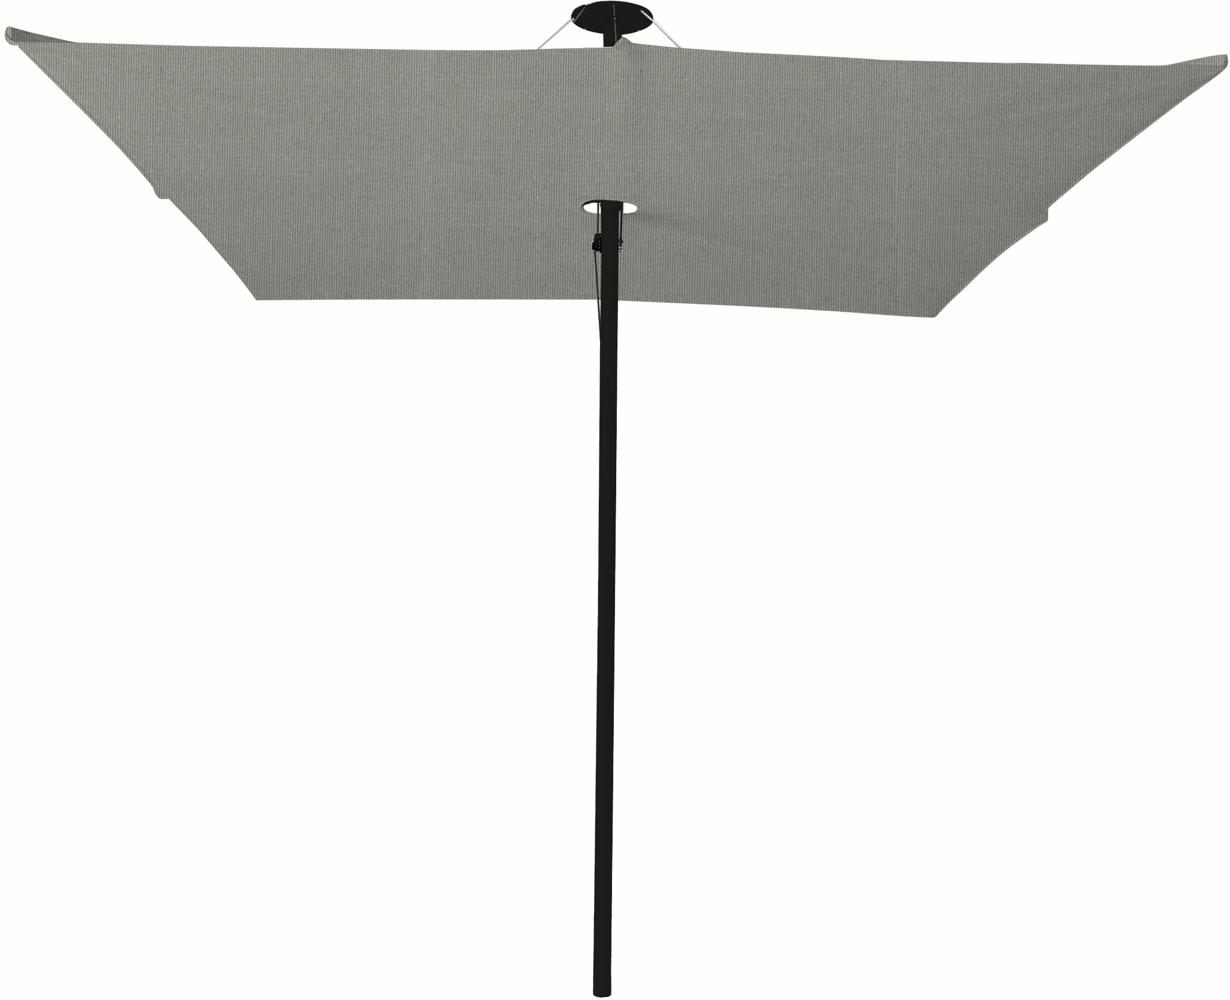 Infina center post umbrella, 2,5 m square, with frame in Dusk and Solidum Grey canopy. 